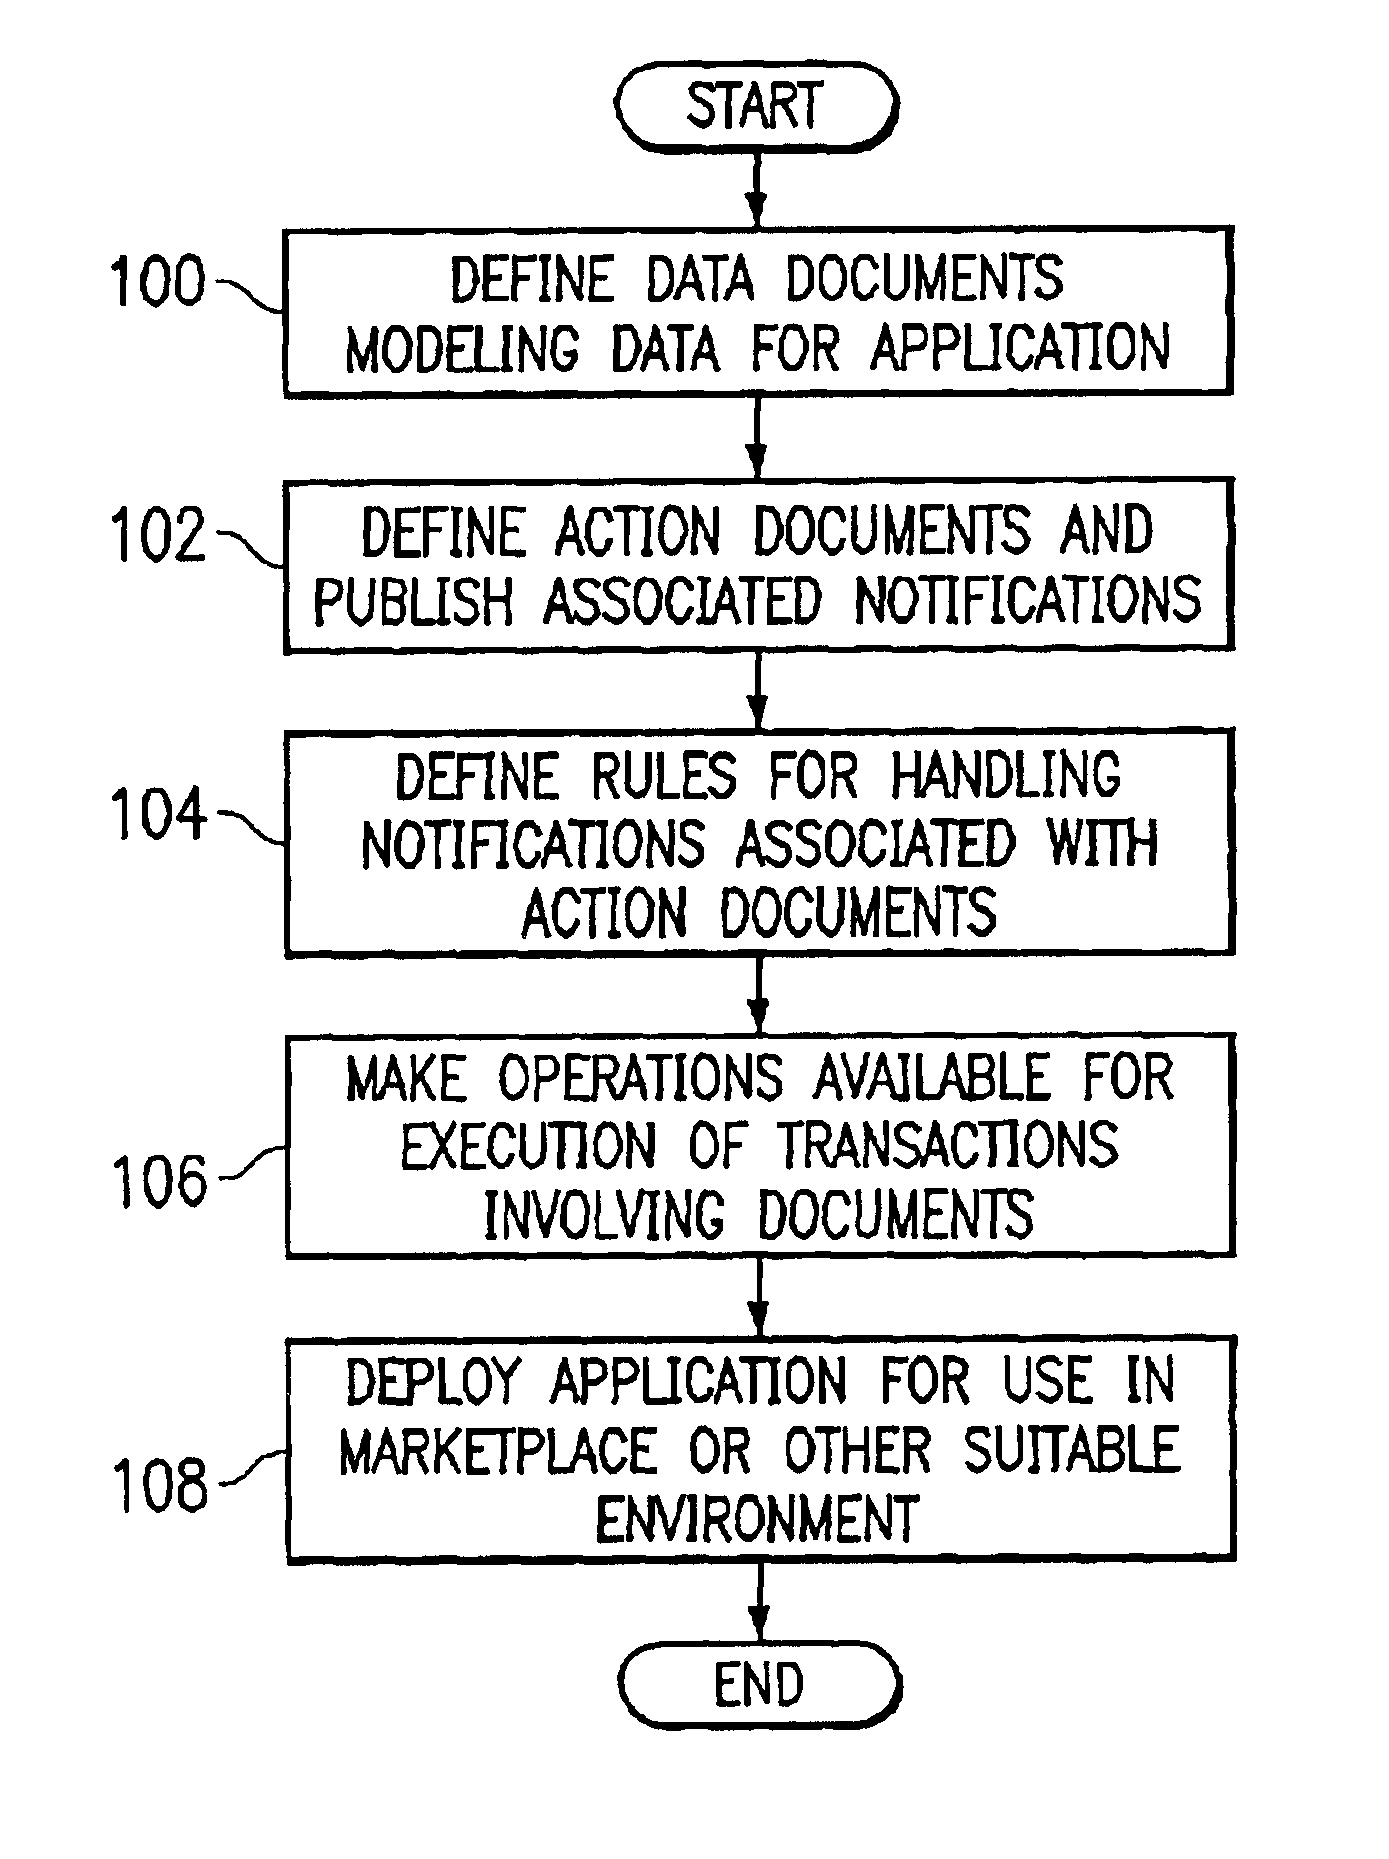 System and method for developing software applications using an extended XML-based framework